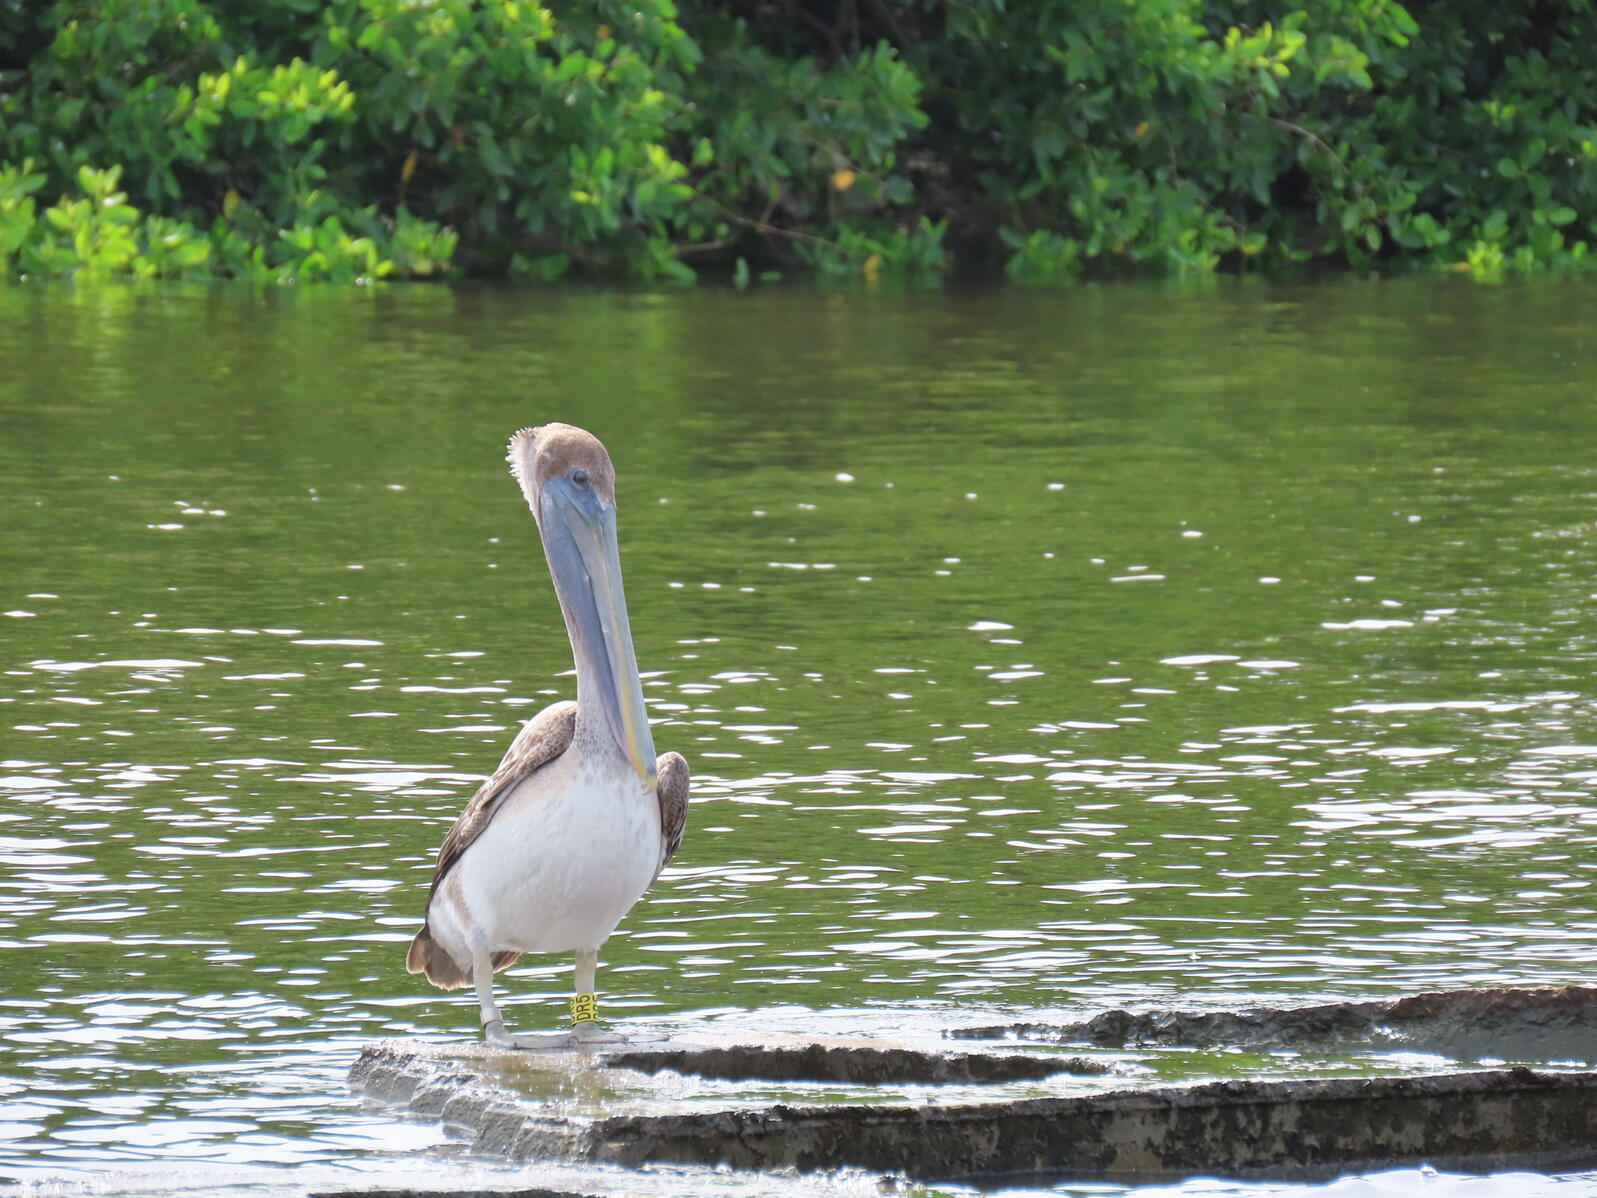 Brown Pelican sitting on a dock with a bright yellow band on one leg. Water in the background.